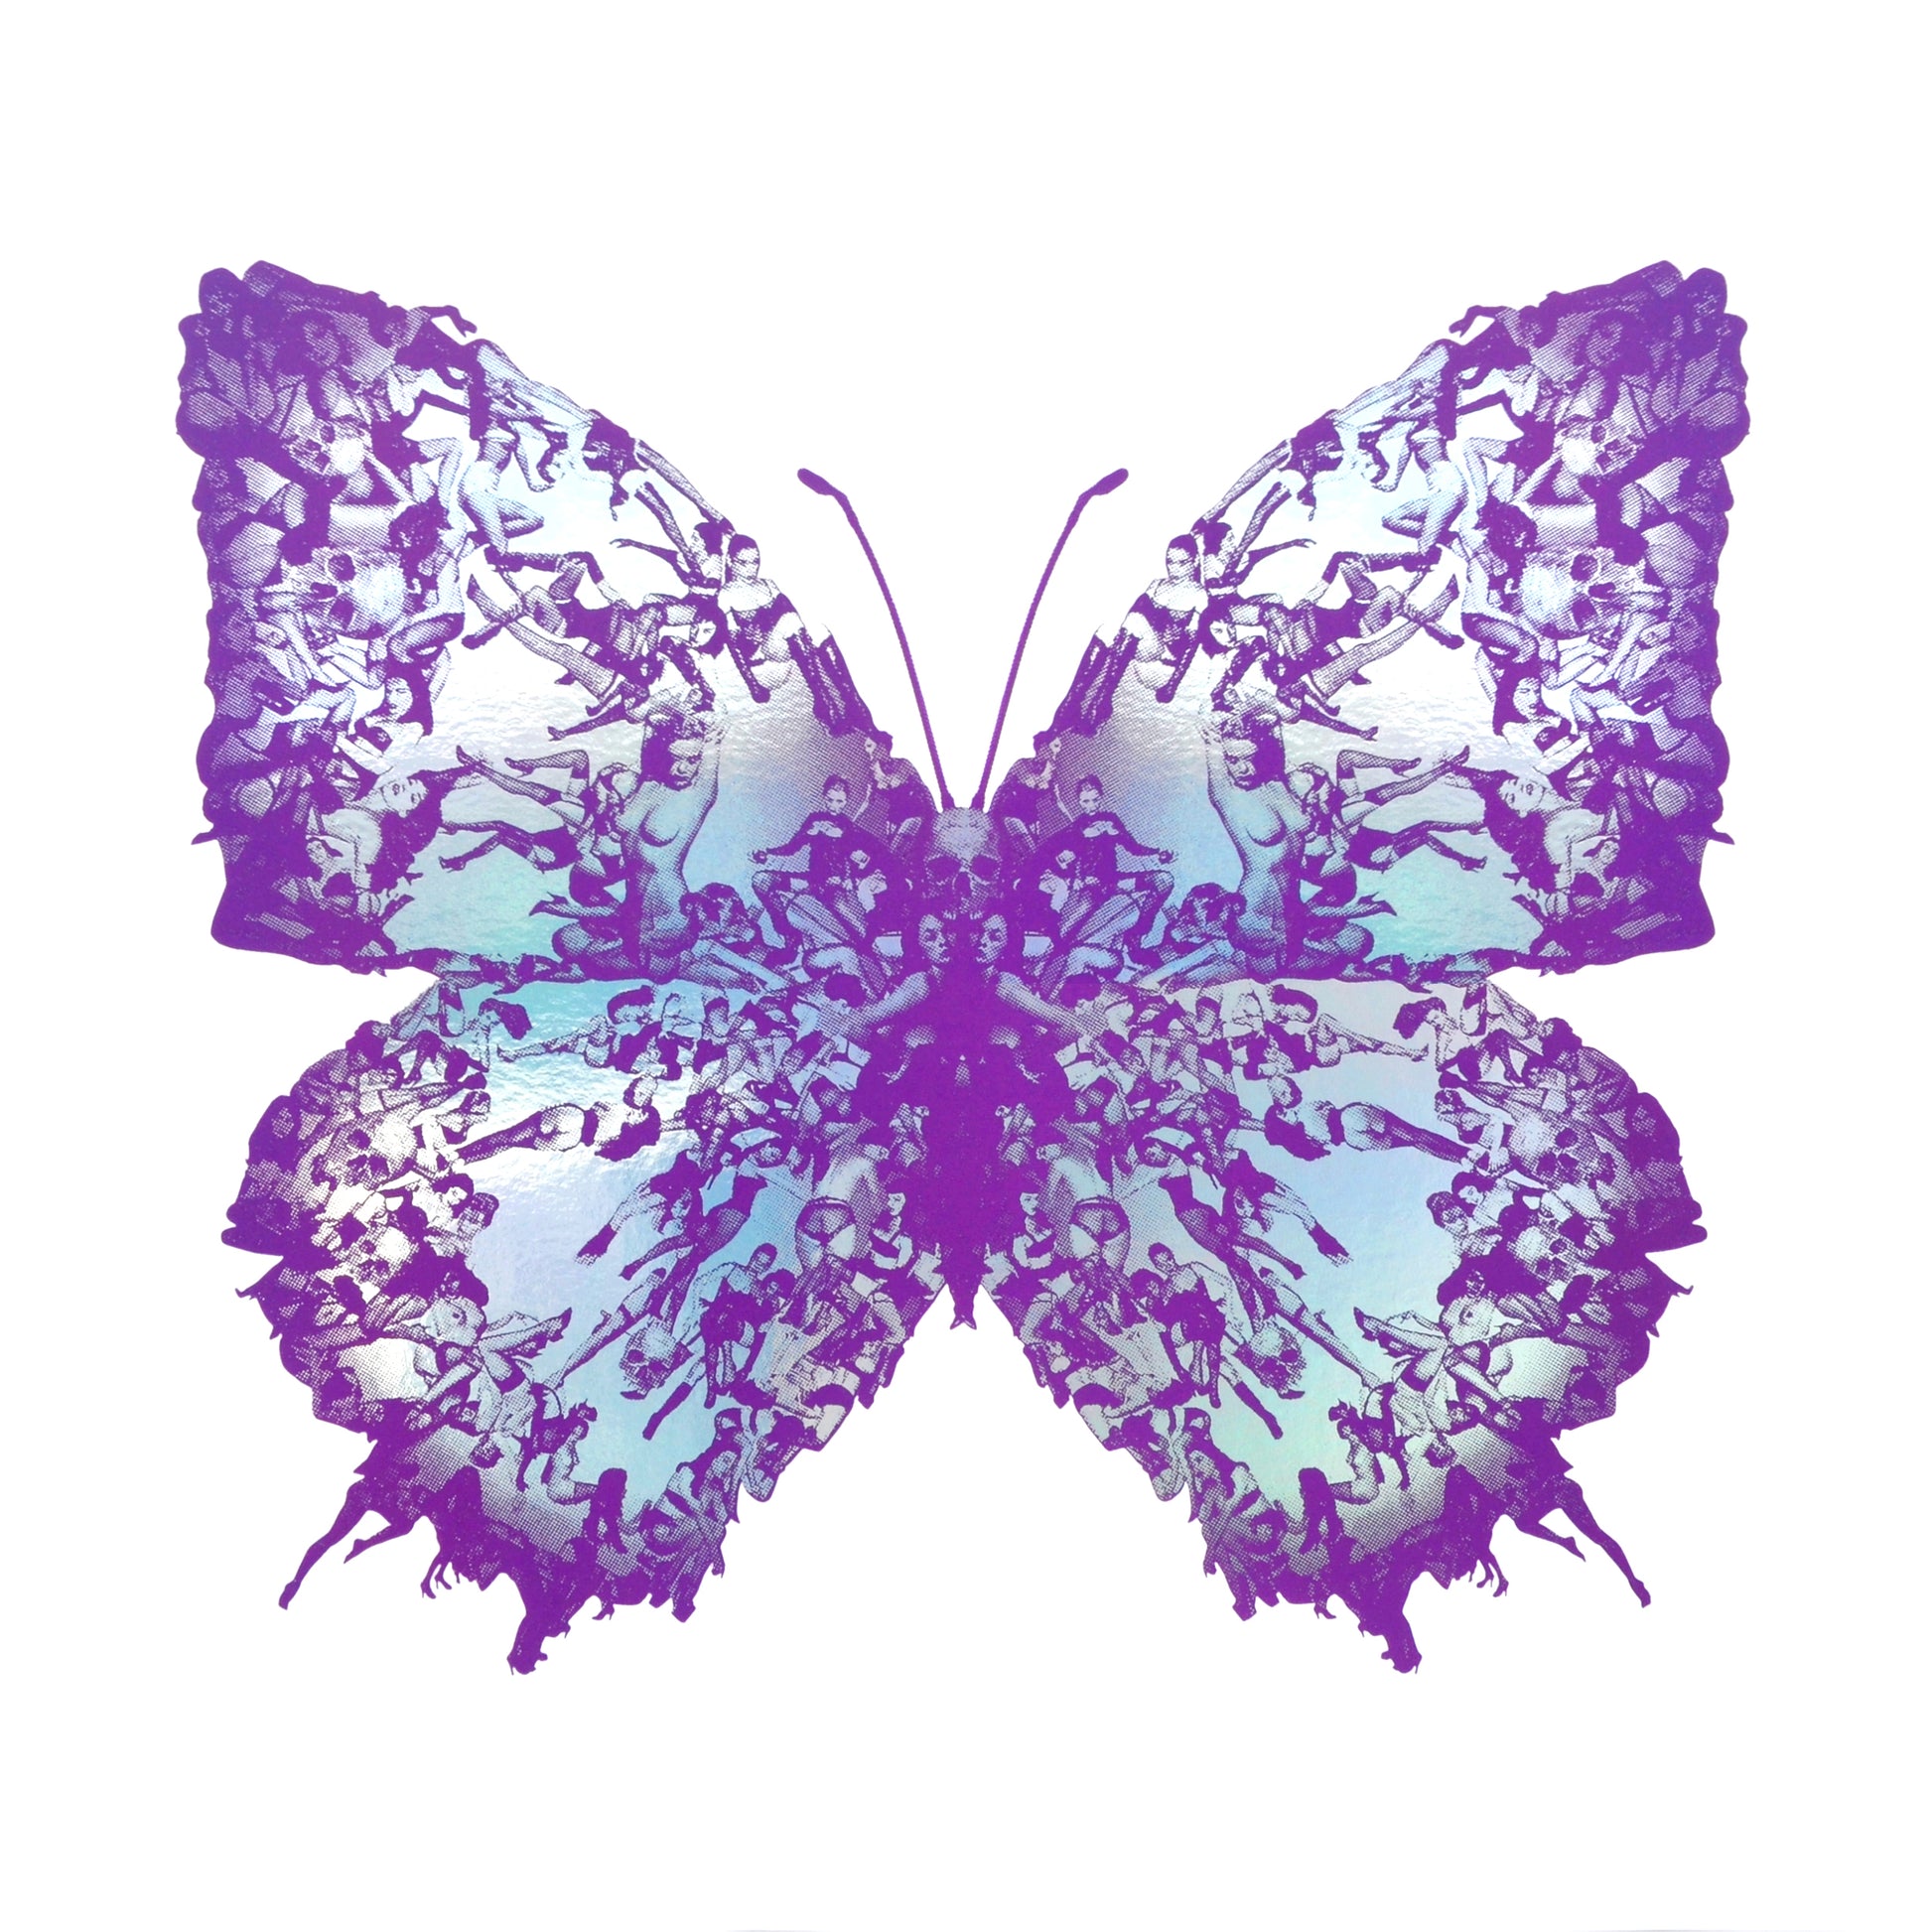 Cassandra-Yap-TAP-Galleries-Deliverance-Mini-Violet-Purple-Rainbow-Holographic-Foil-Limited-Edition-Butterfly